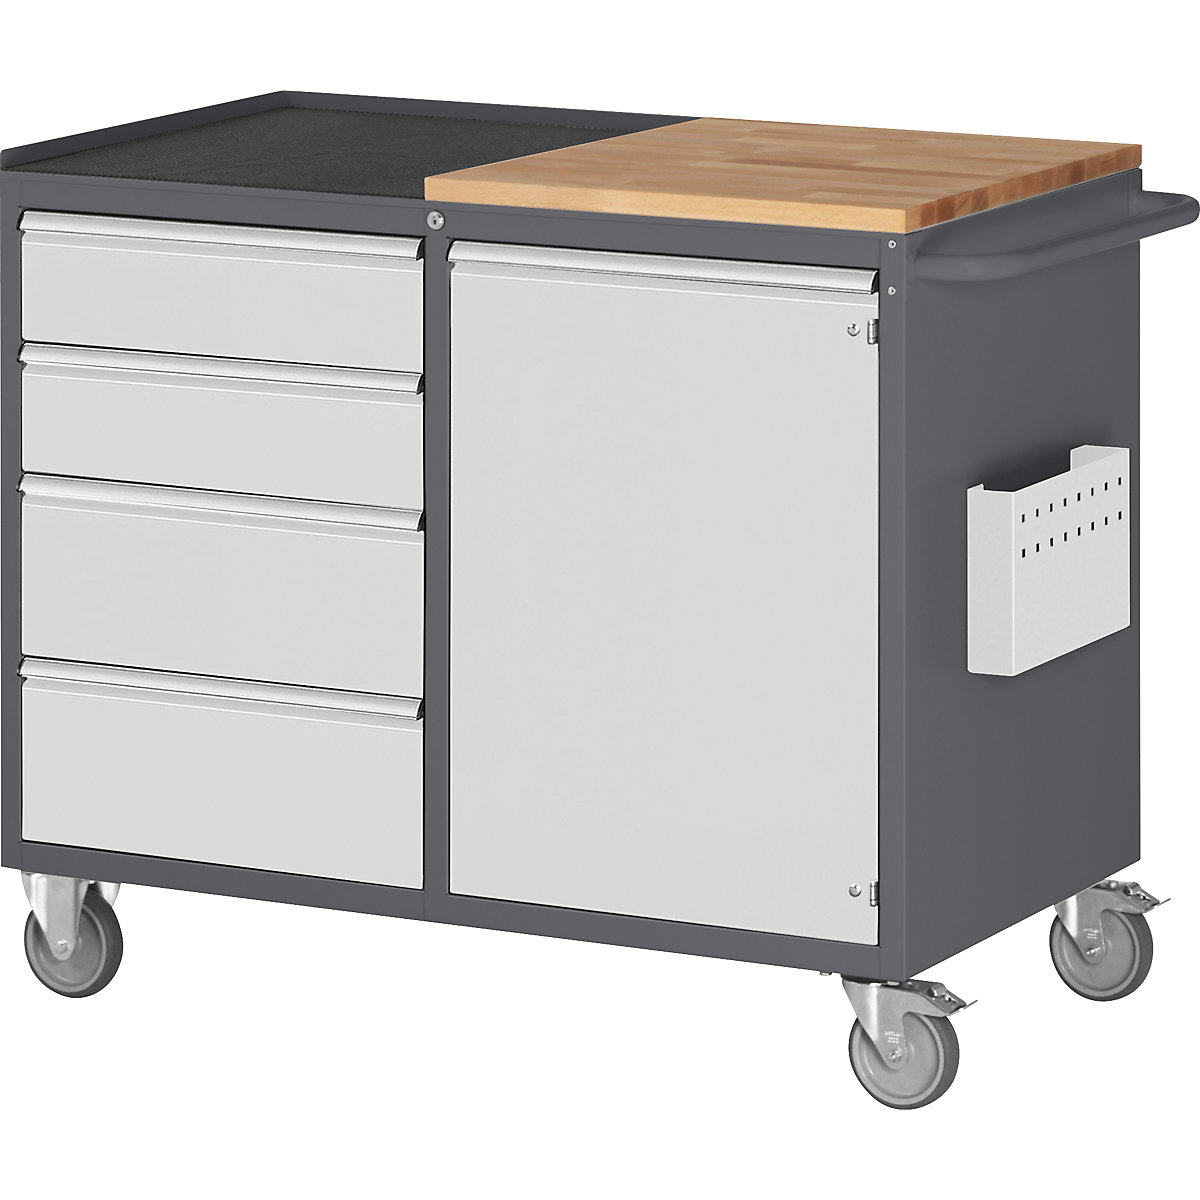 Compact workbenches, mobile – RAU, 4 drawers, 1 door, wood / metal work surface, charcoal / light grey-4